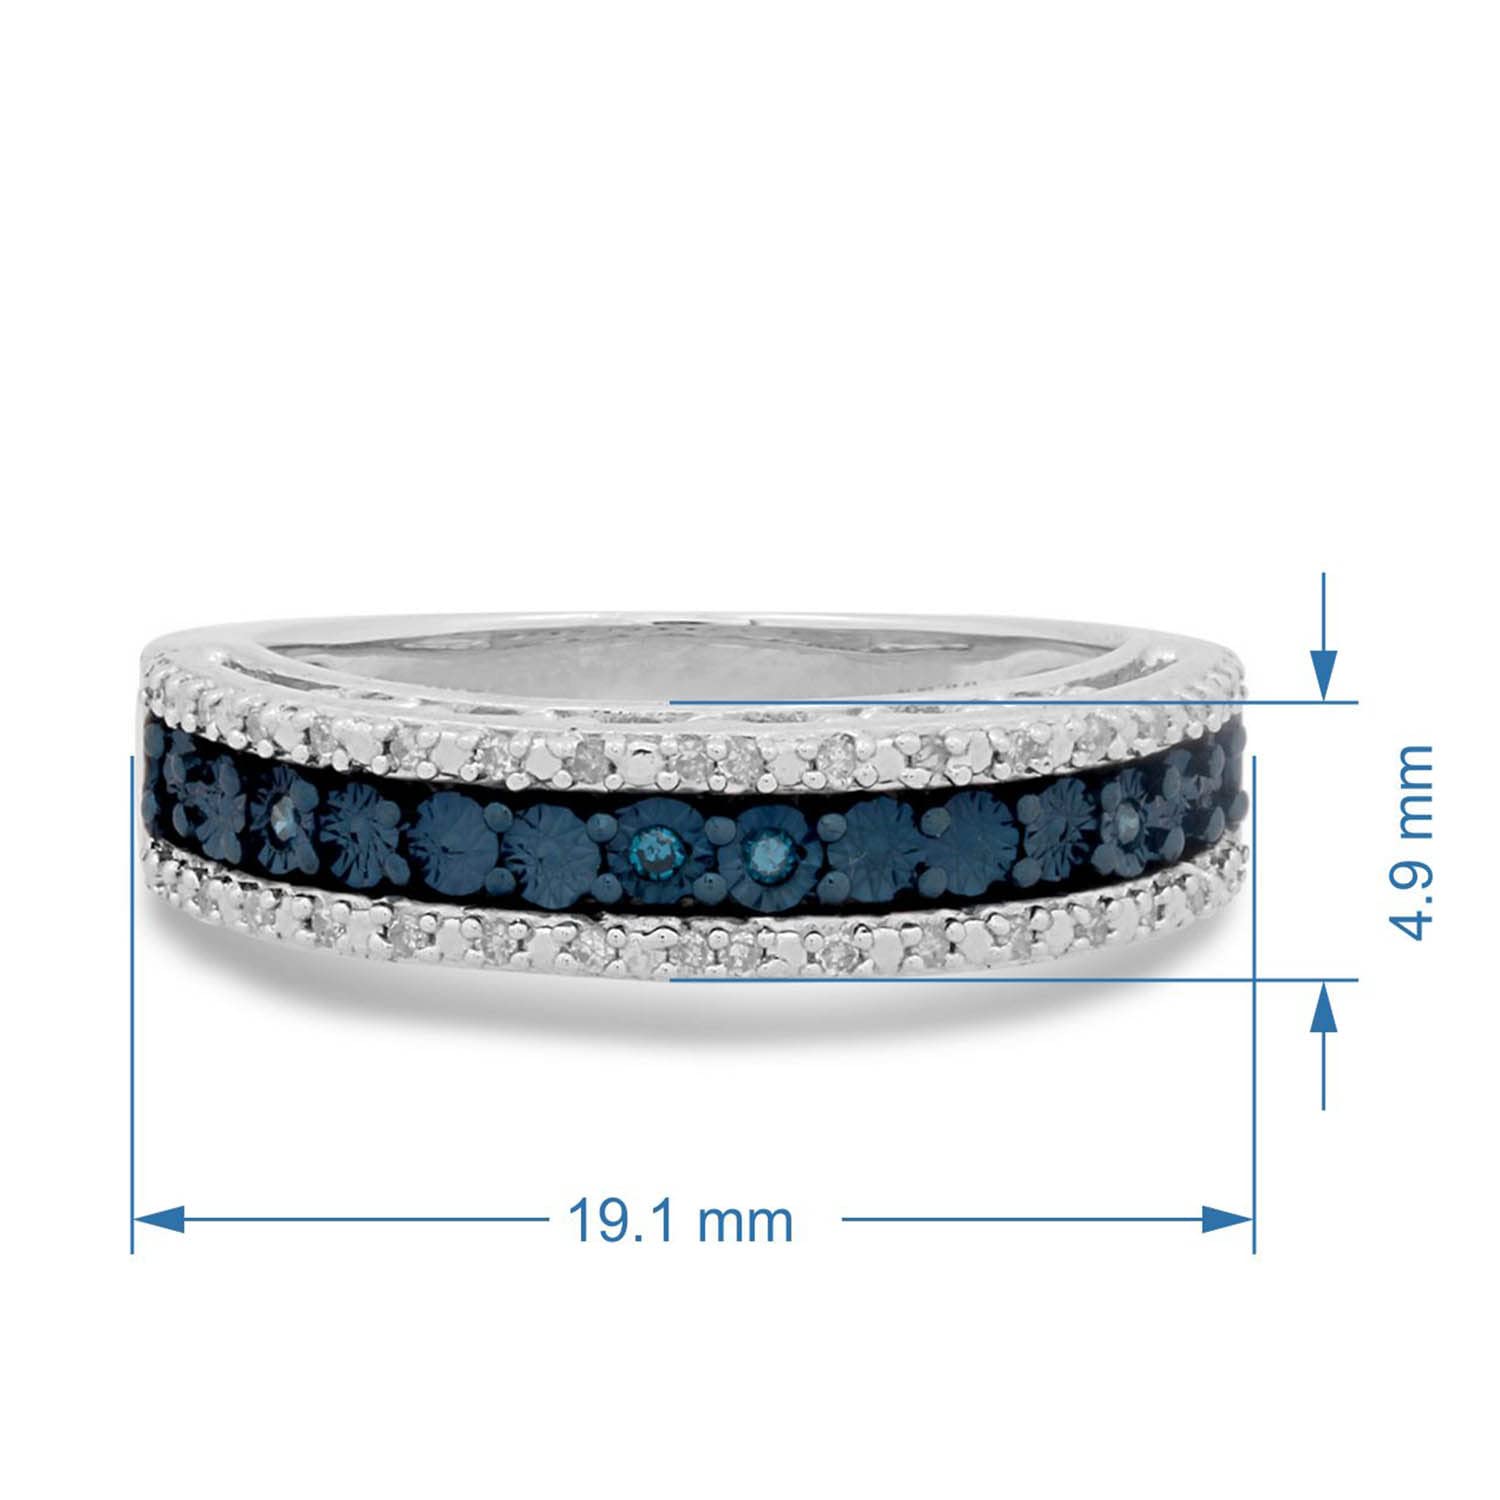 Jewelili Sterling Silver 1/10 Cttw Natural Miracle Plated Blue and White Round Diamond Anniversary Ring